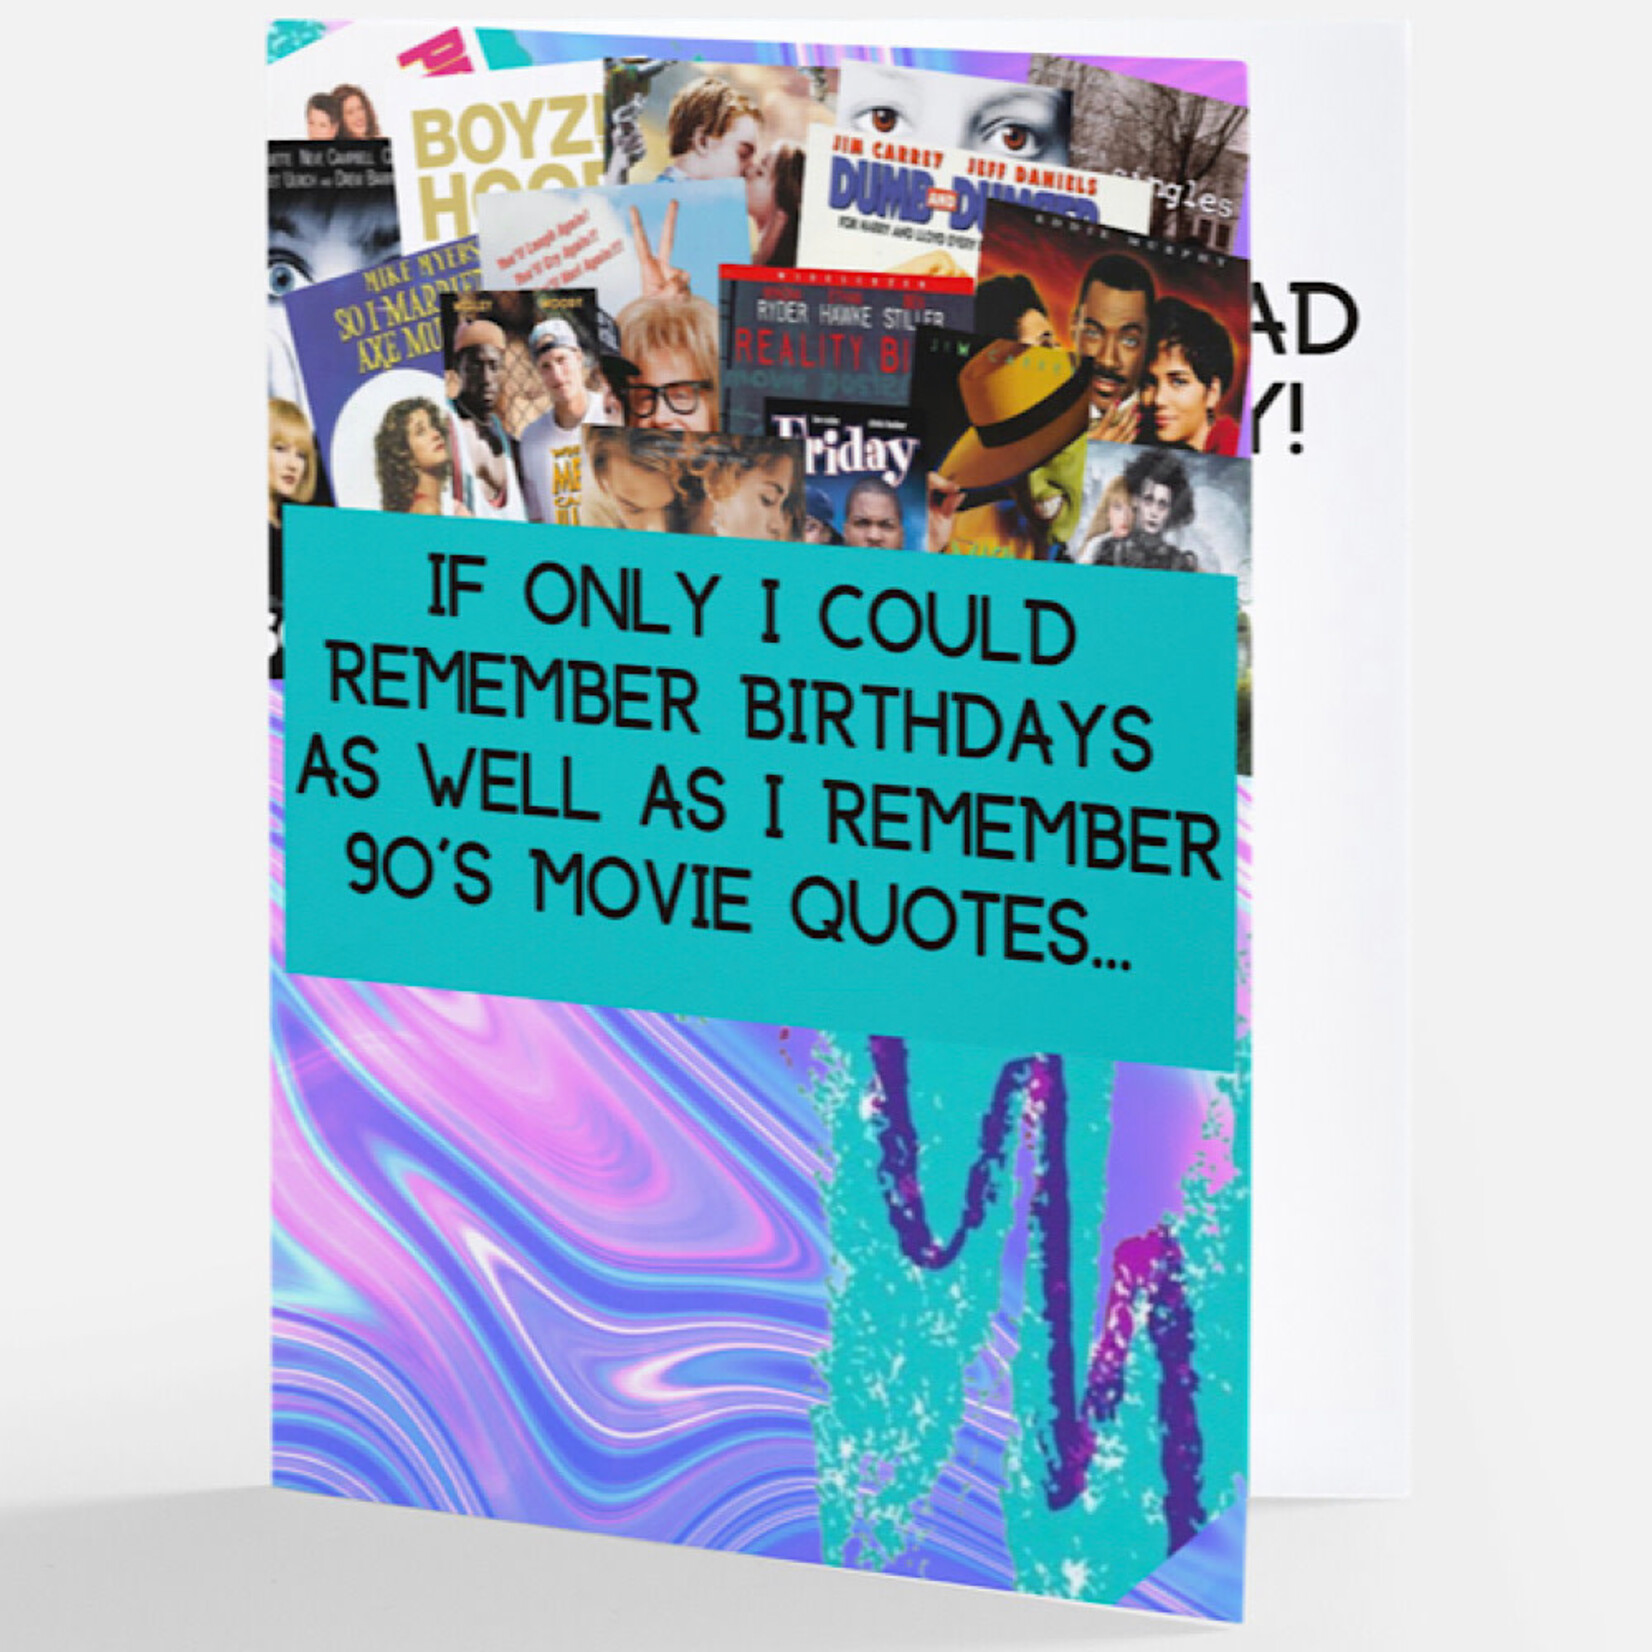 Bad Annie’s Card - If Only I Could Remember Birthdays As Well As I Remember 90’s Movie Quotes…